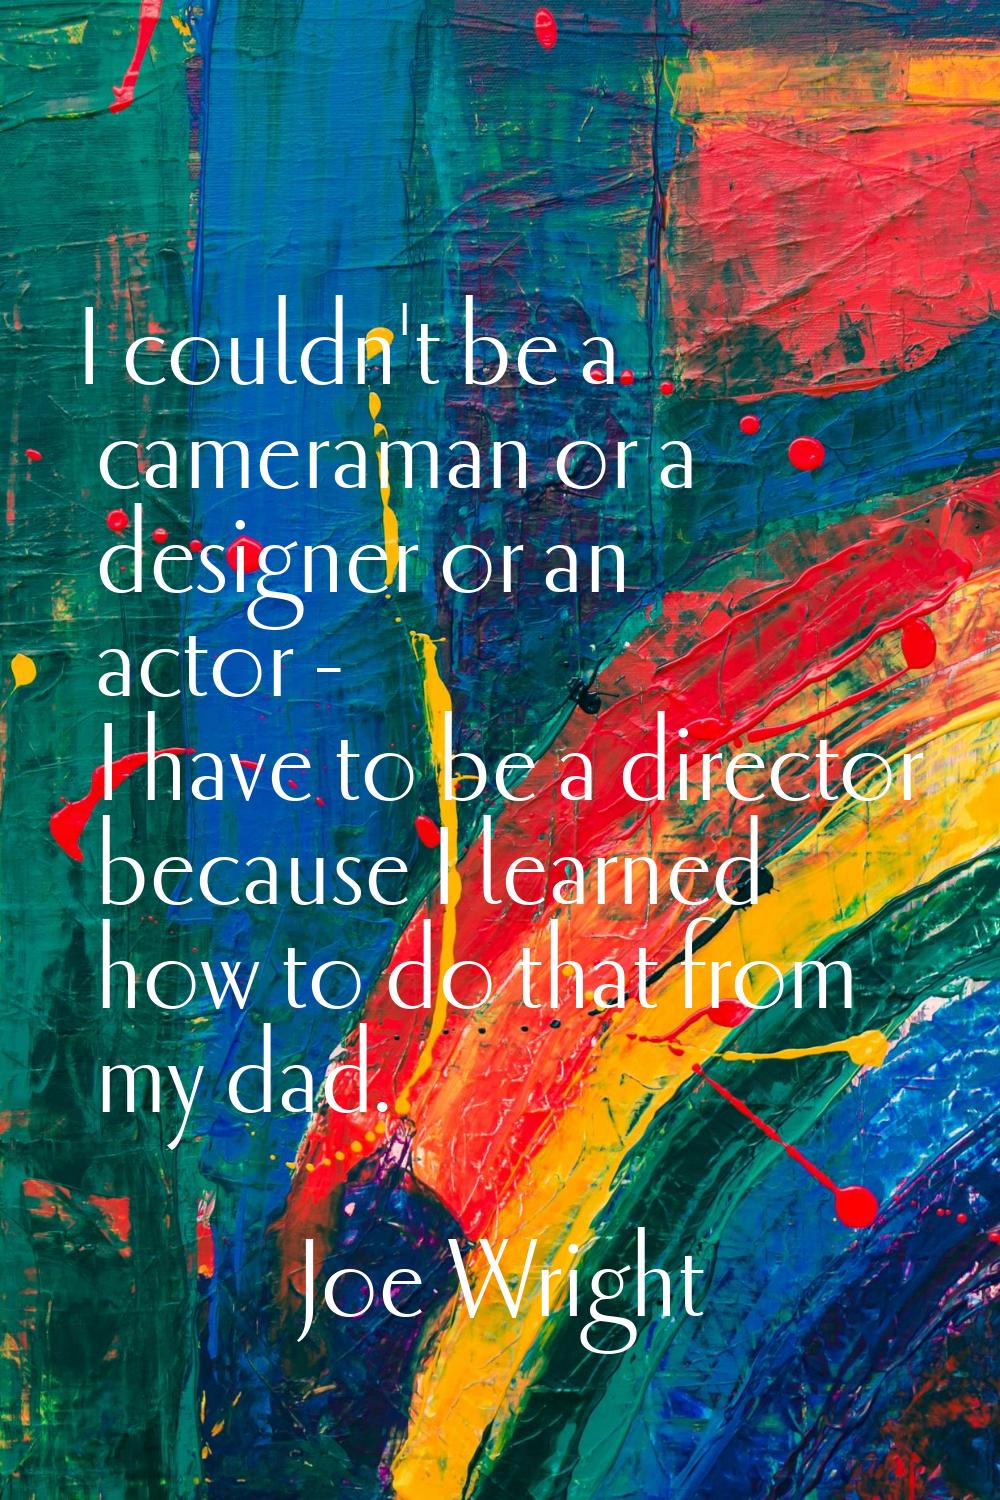 I couldn't be a cameraman or a designer or an actor - I have to be a director because I learned how